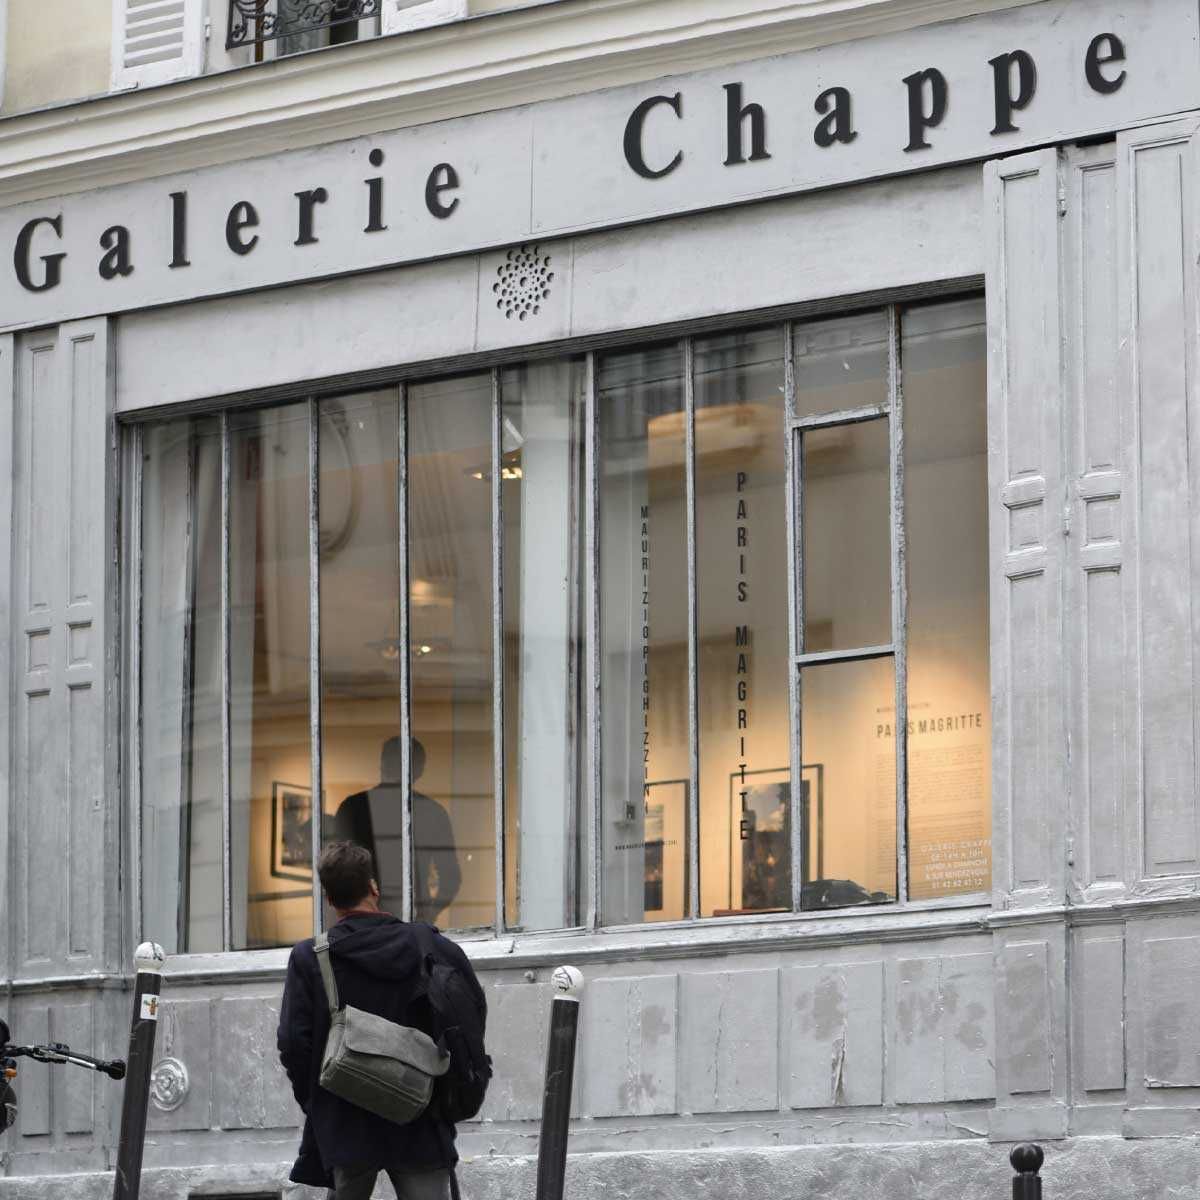 Galerie Chappe